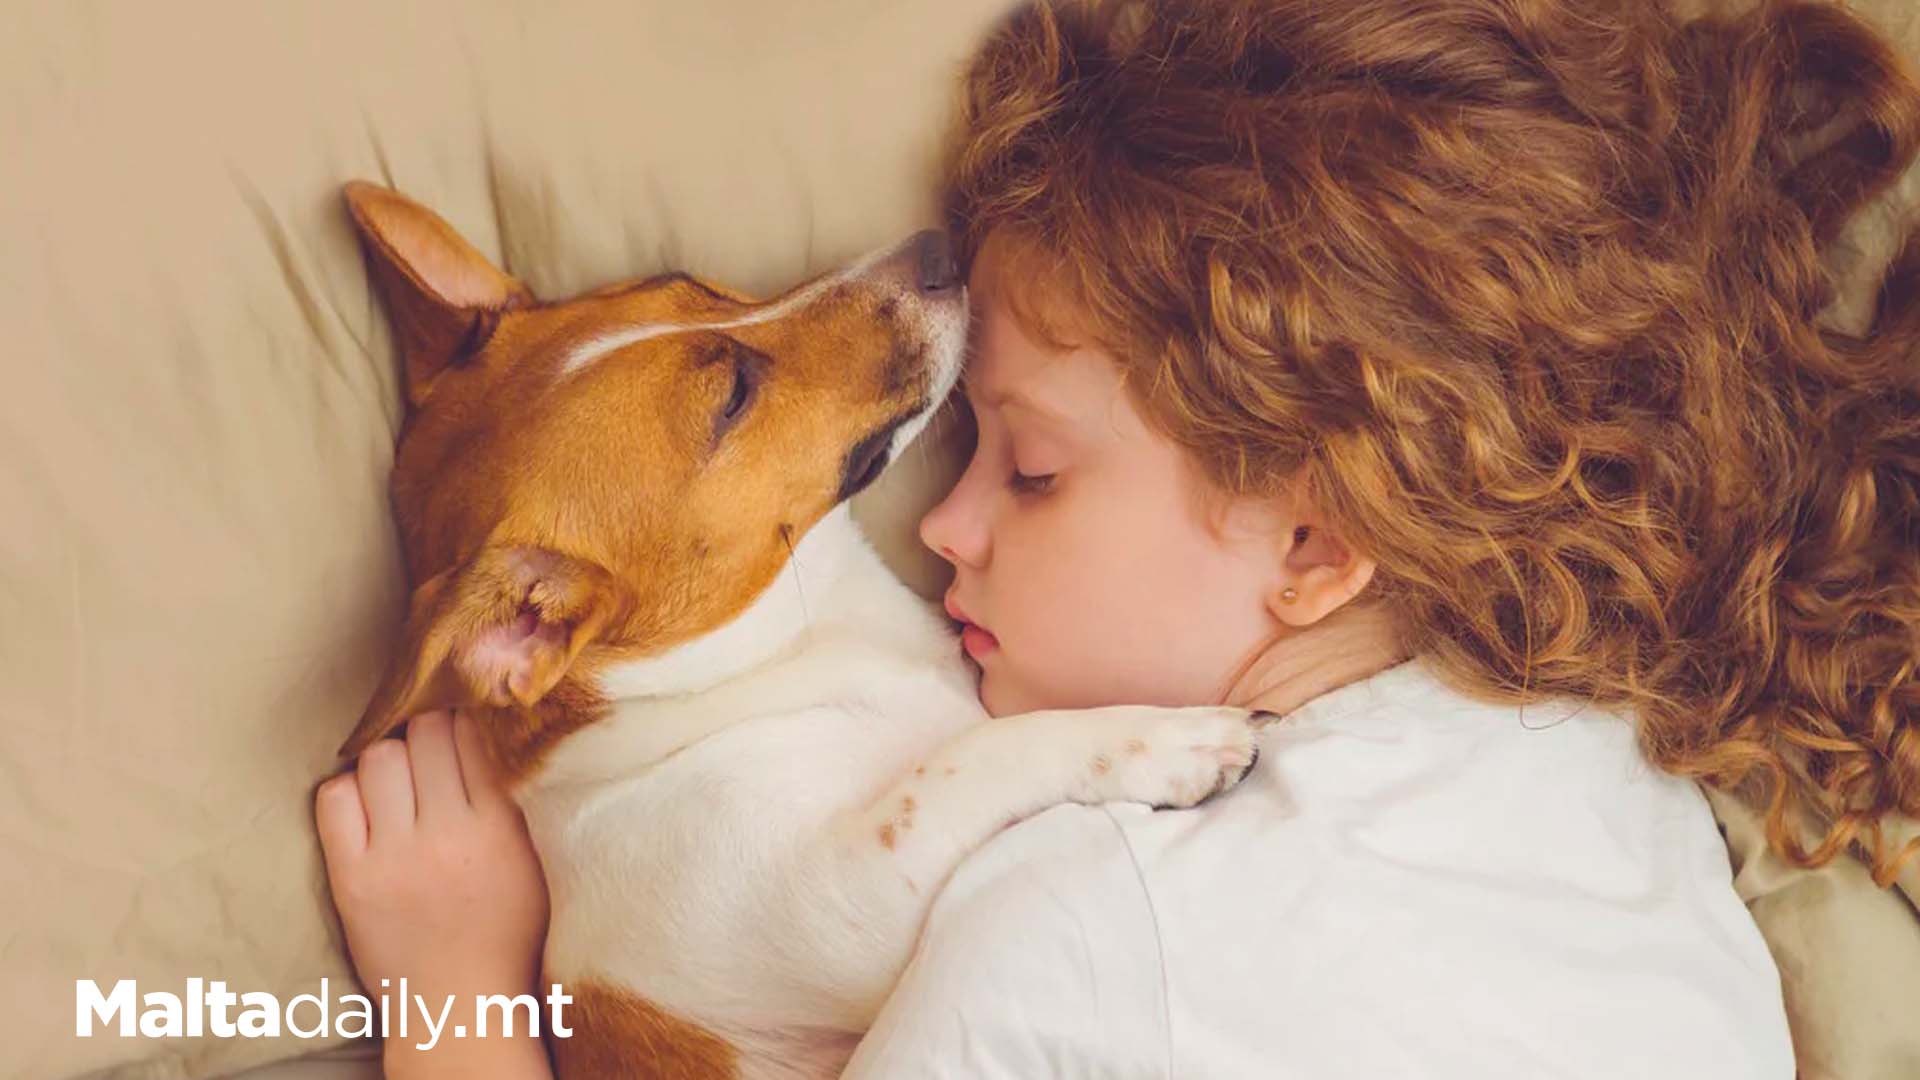 Sleeping Alongside Your Pet May Help With Mental Health